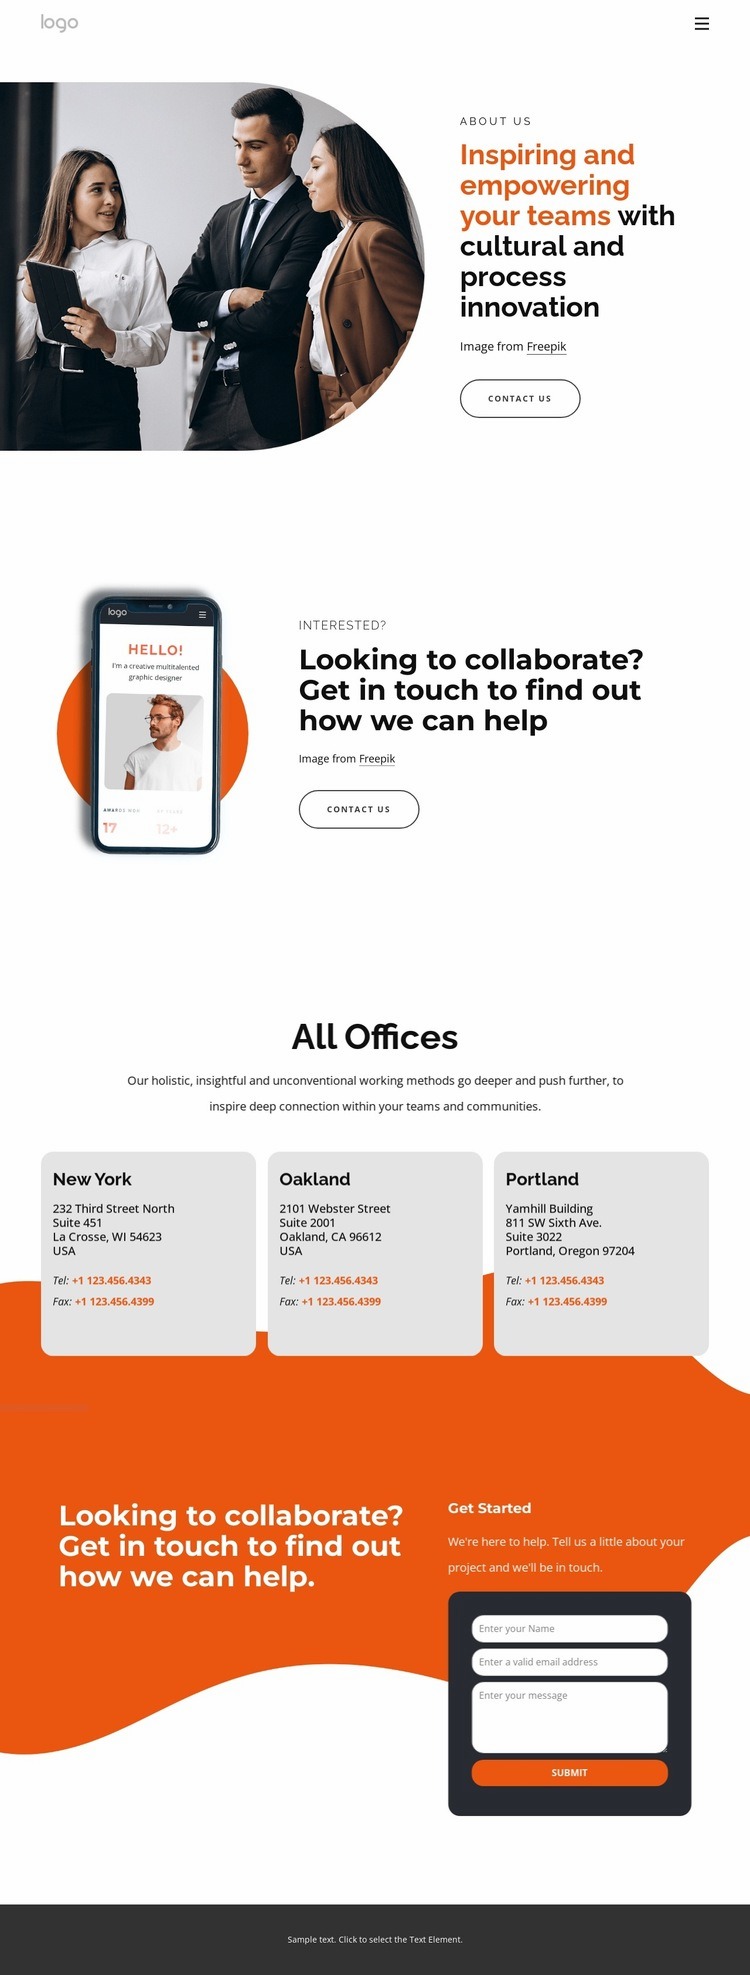 Product-based strategic solutions Squarespace Template Alternative